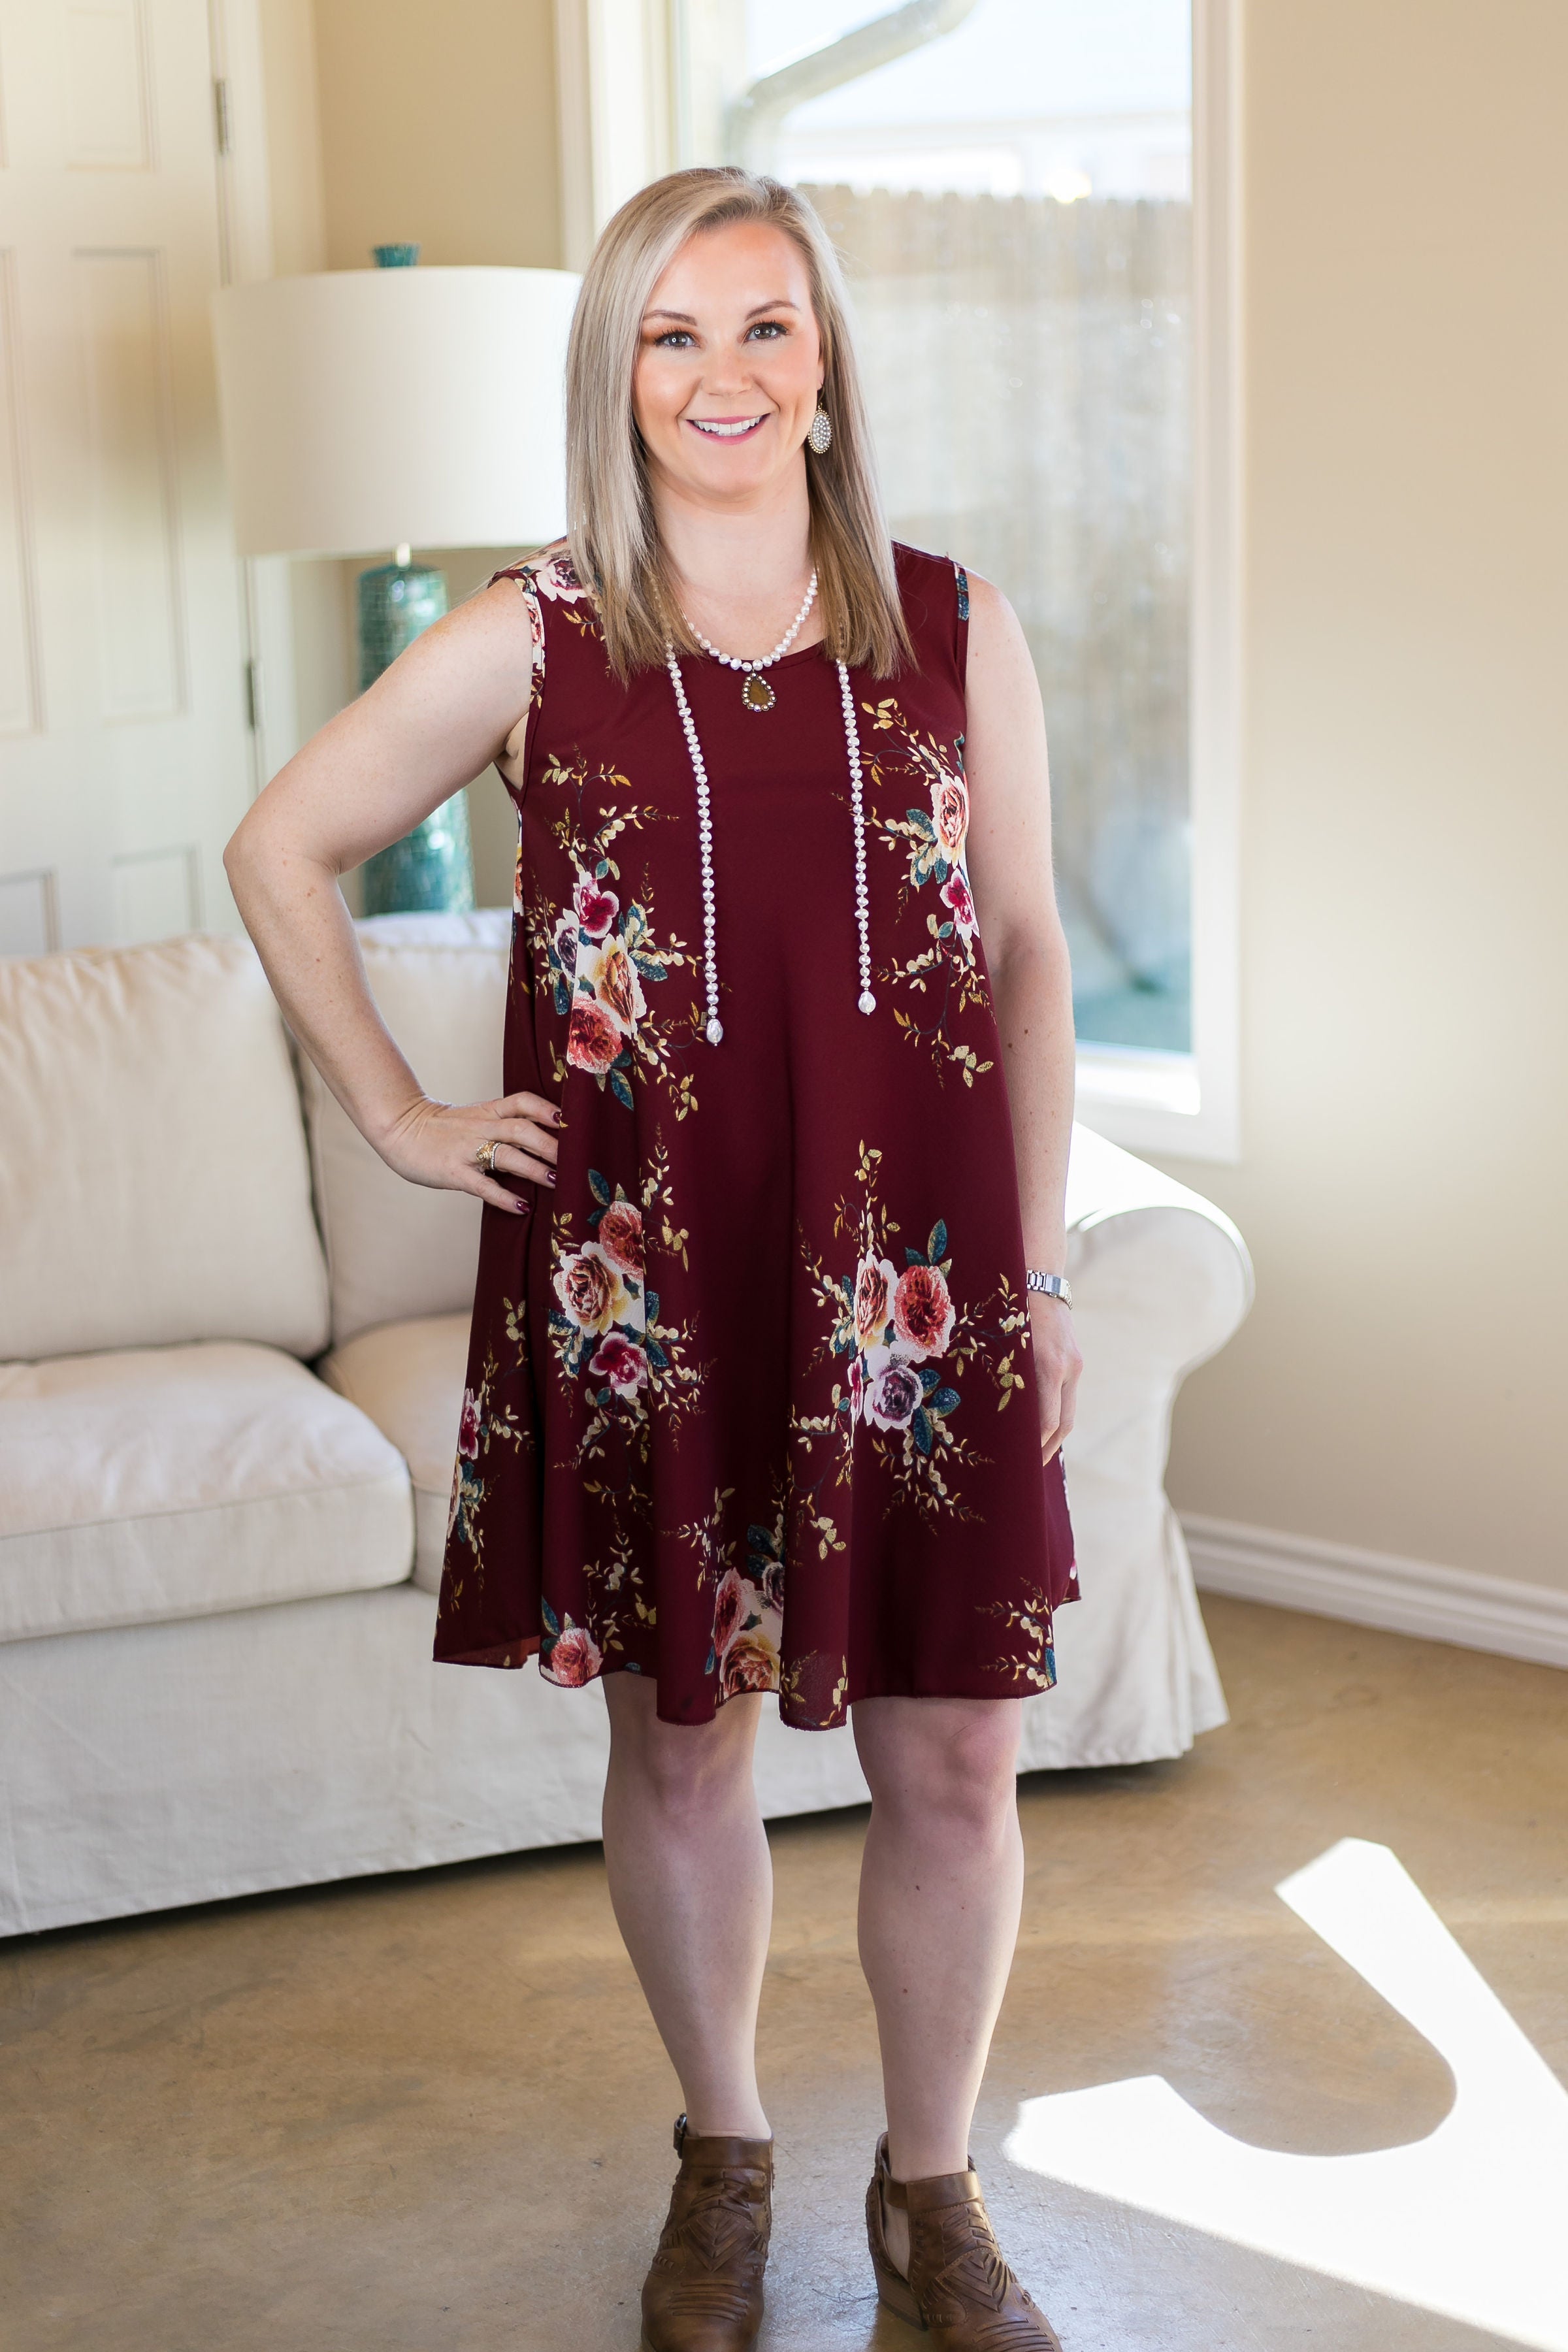 Last Chance Size S/M | What I'm About Floral A Line Dress in Maroon - Giddy Up Glamour Boutique